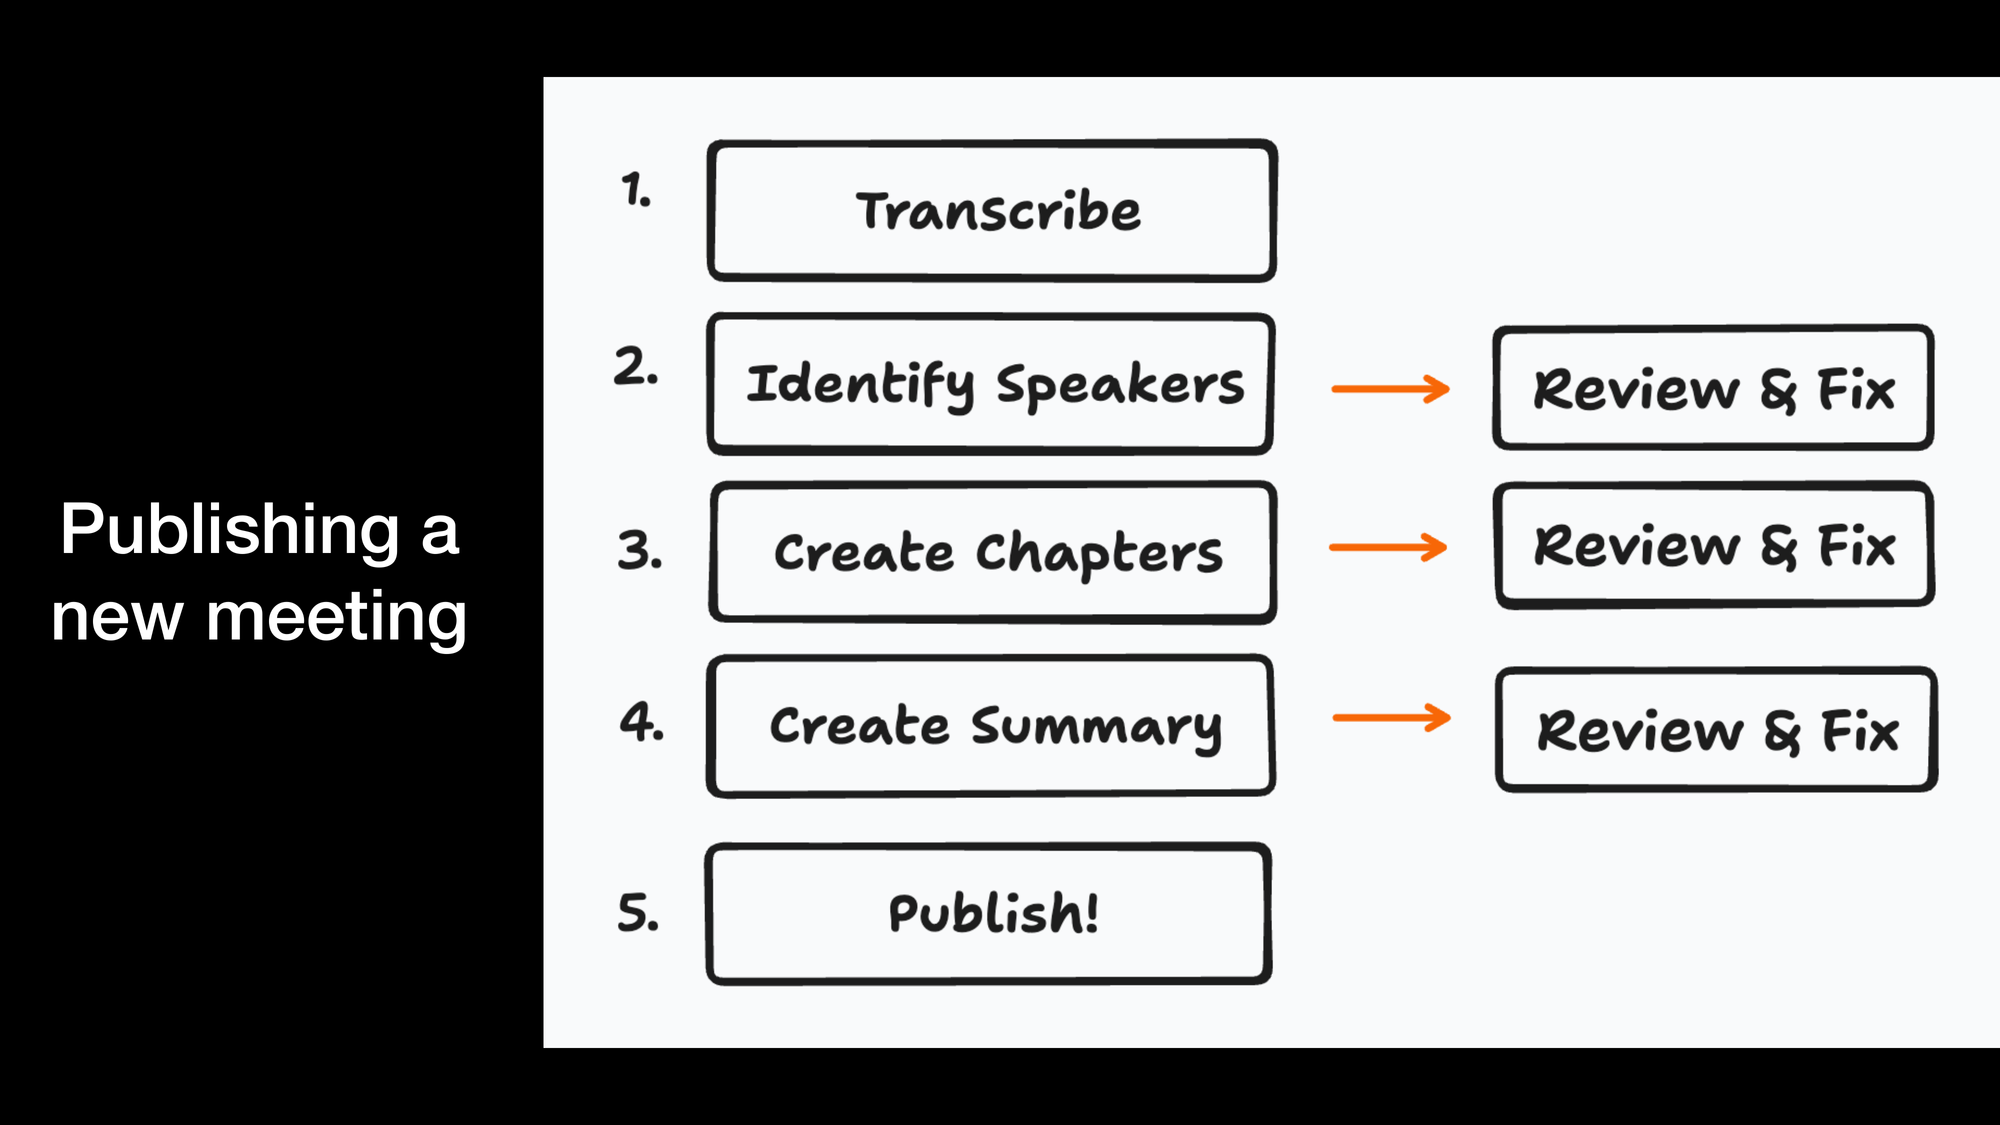 Publishing a new meeting. A diagram that shows 5 steps: Transcribe, Identify Speakers, Create Chapters, Create Summary, and Publish. Steps 2 through 5 &ndash; Identify Speakers, Create Chapters, Create Summary &ndash; all have arrows that point to another step titled Review  Fix.